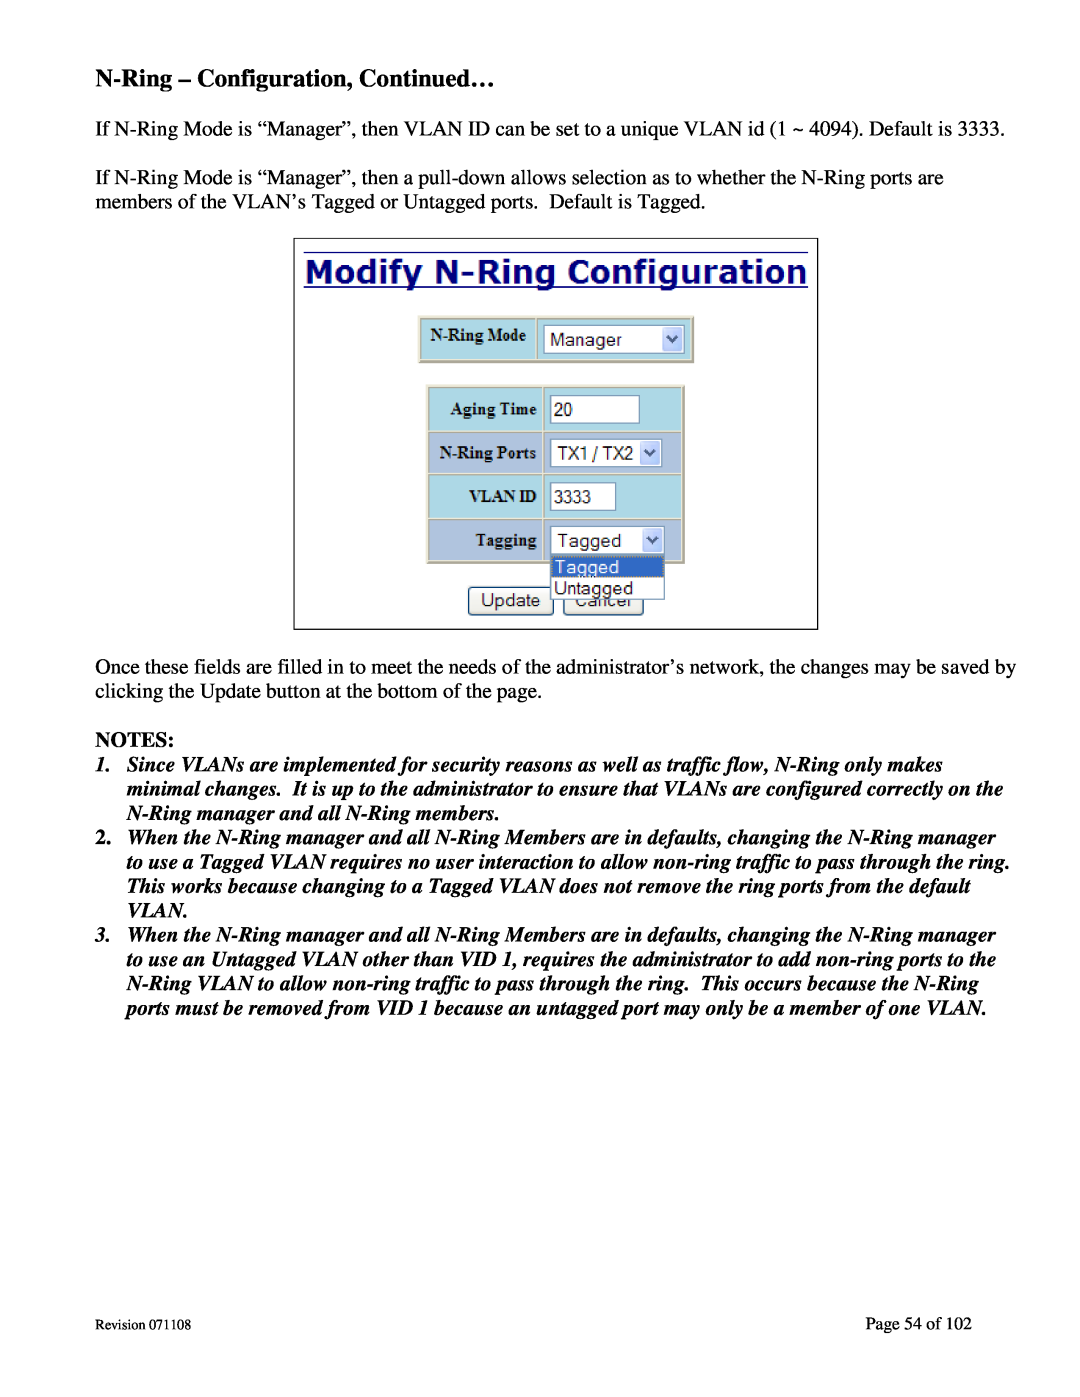 N-Tron 708M12 user manual N-Ring - Configuration, Continued…, Page 54 of 